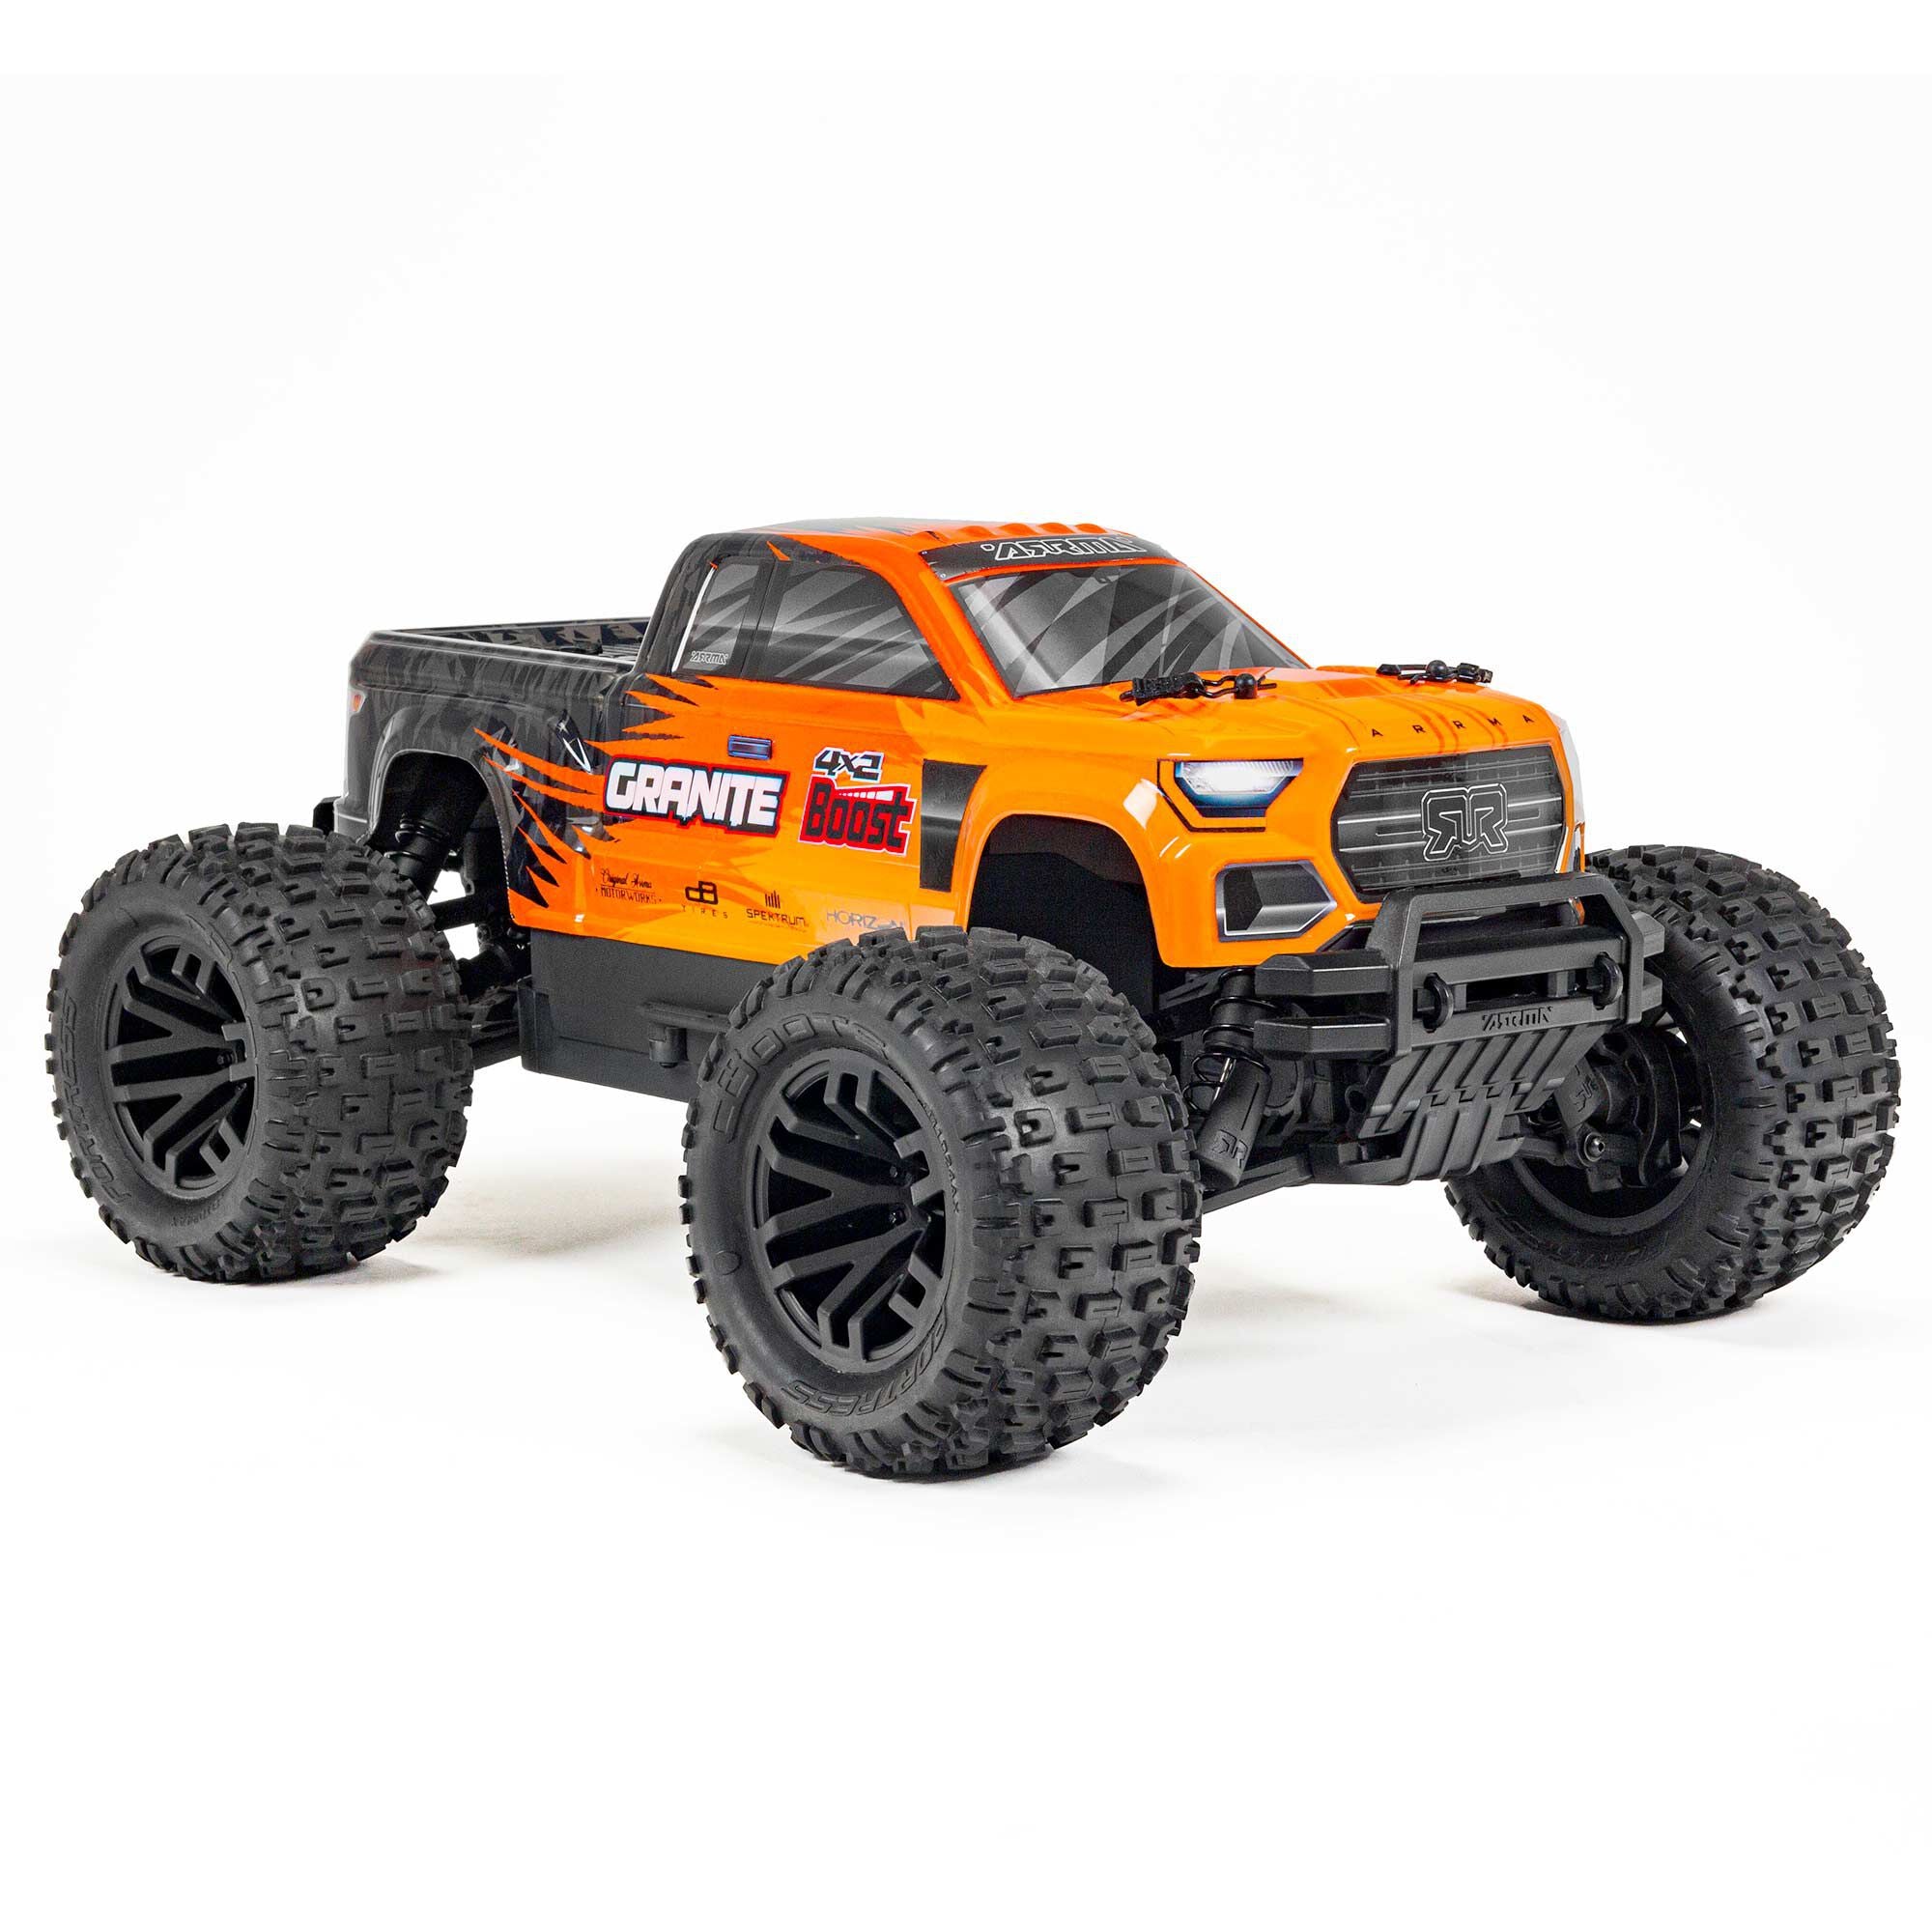 1/10 GRANITE 4X2 BOOST MEGA 550 Brushed Monster Truck RTR with